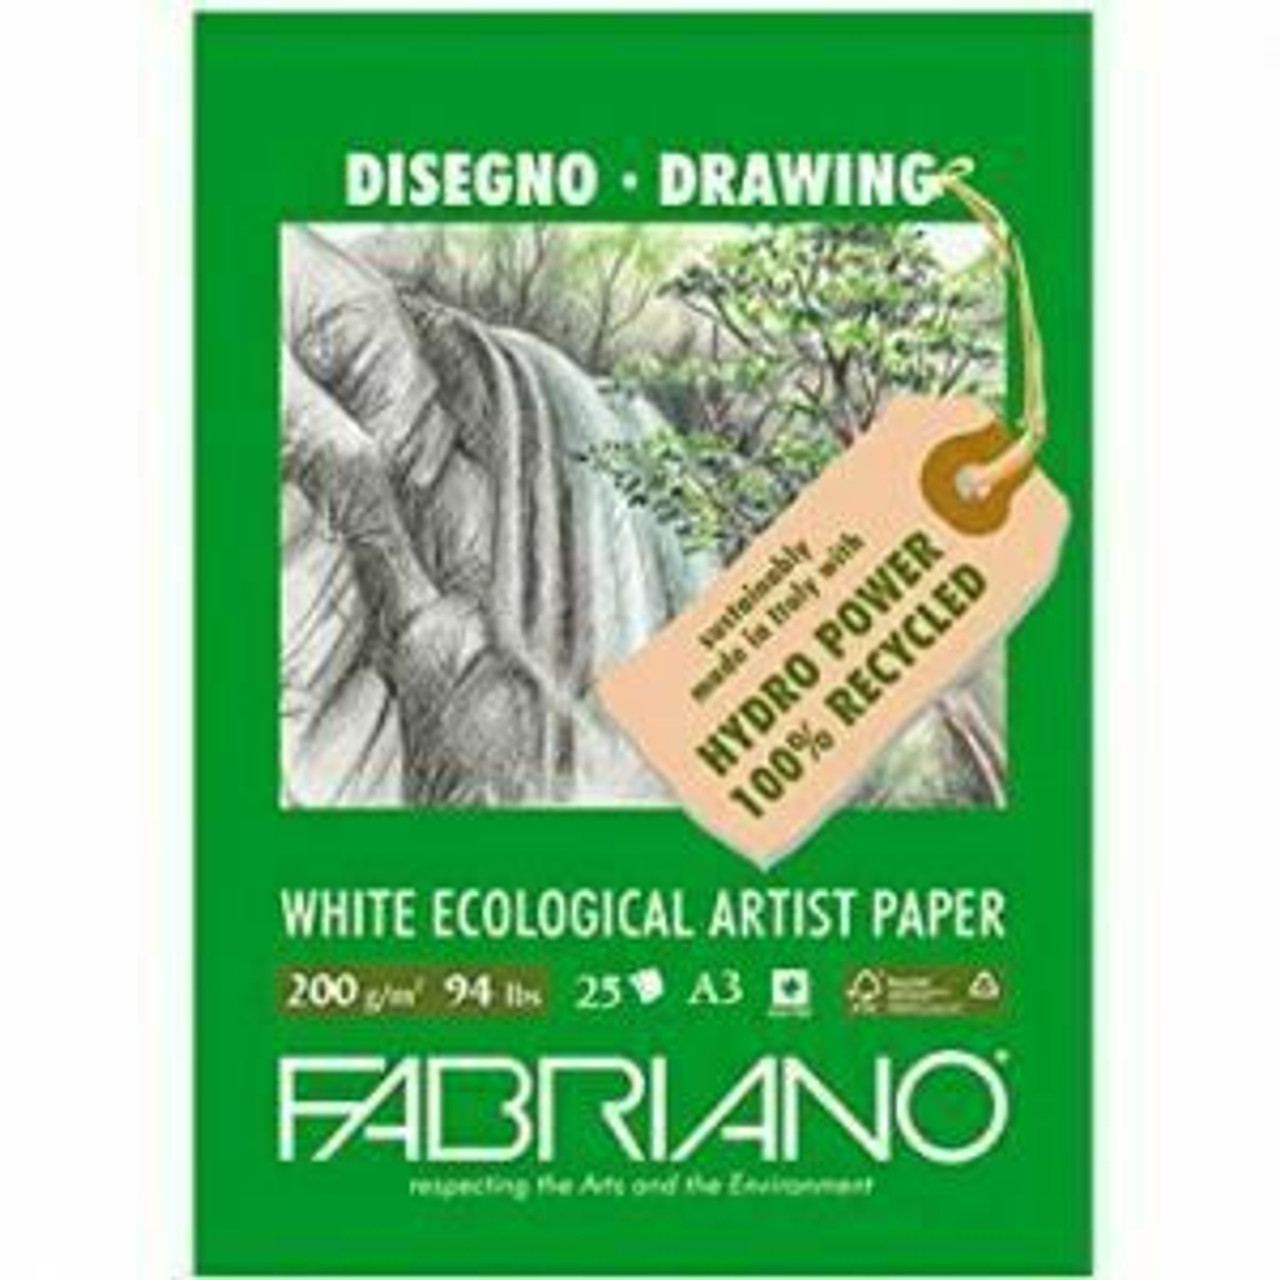 Fabriano Ecologica Cartridge 200gsm 50x65cm pack of 25